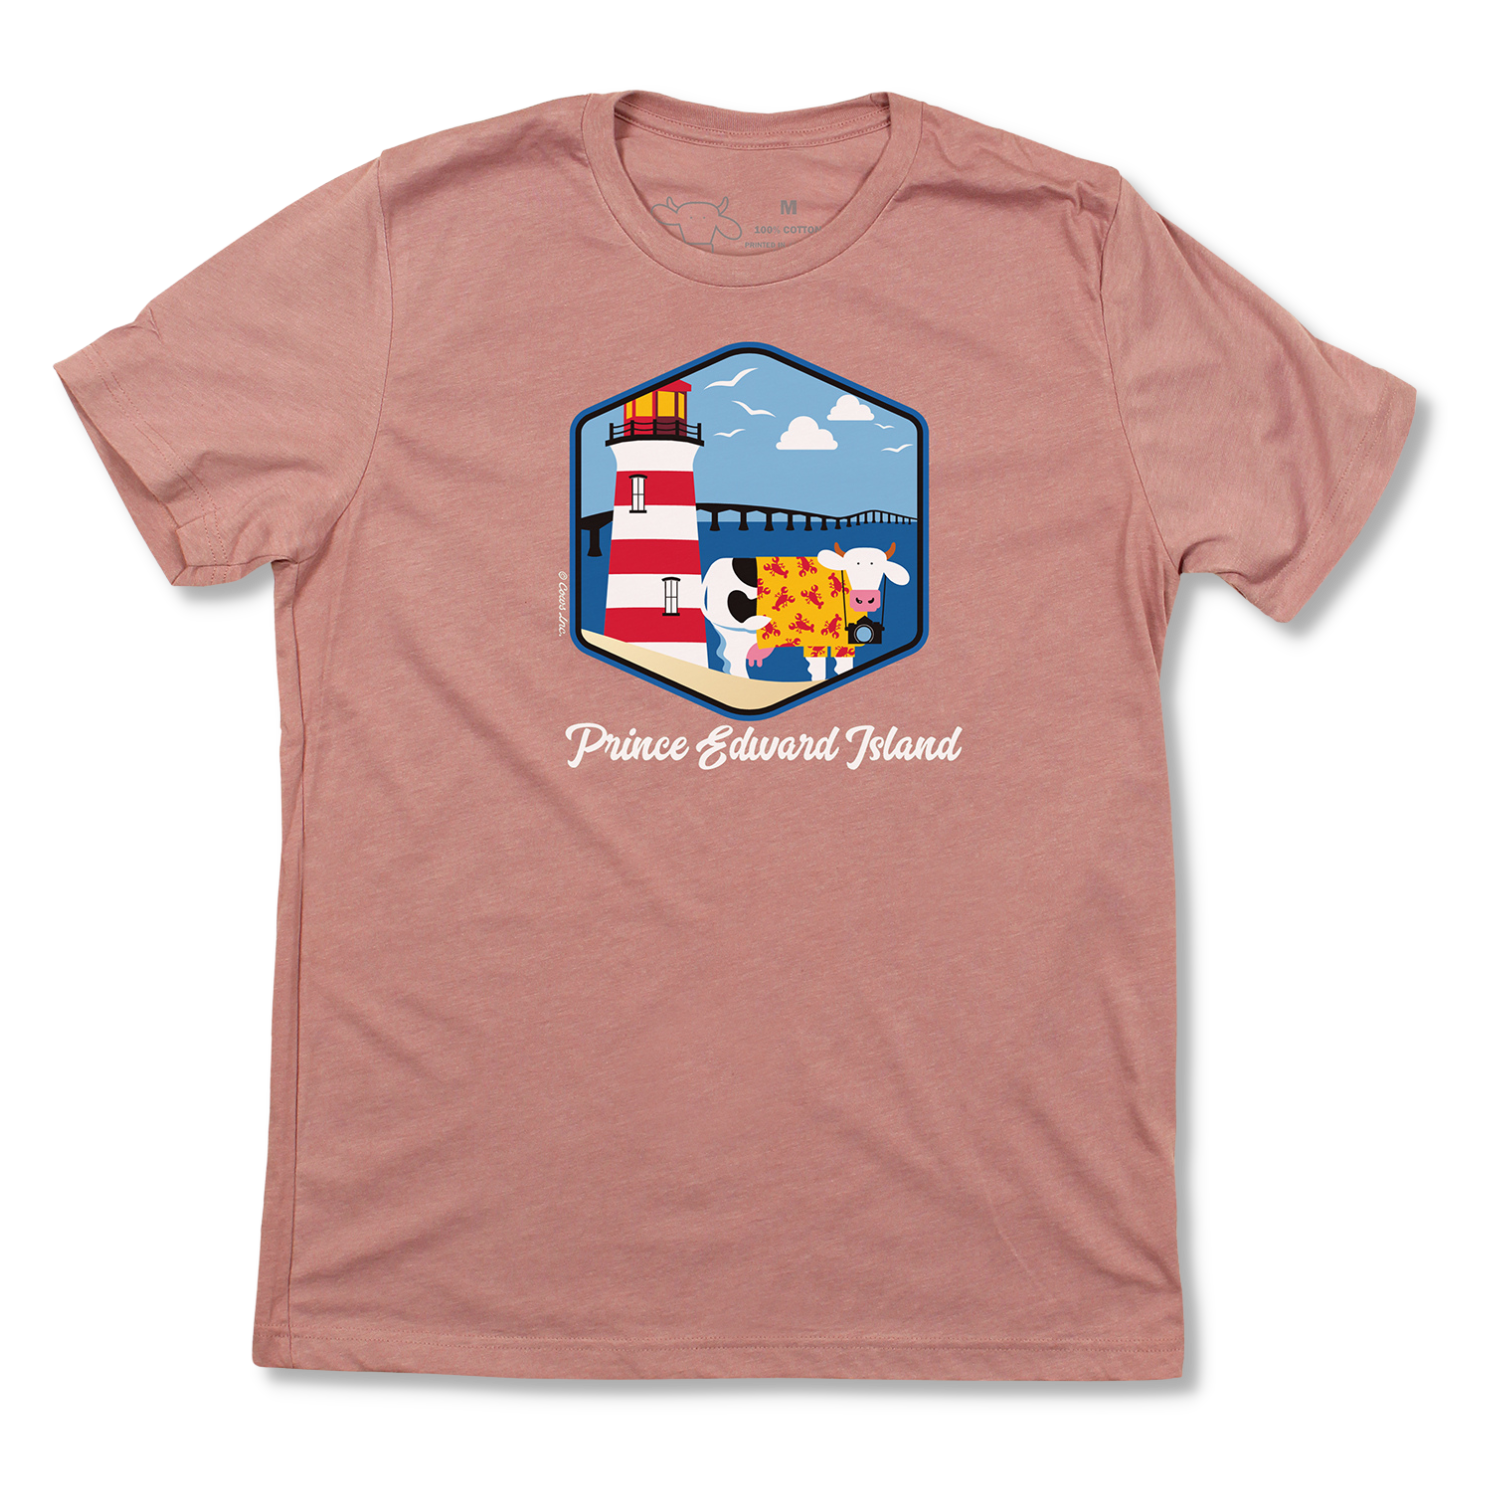 Lighthouse Adult T